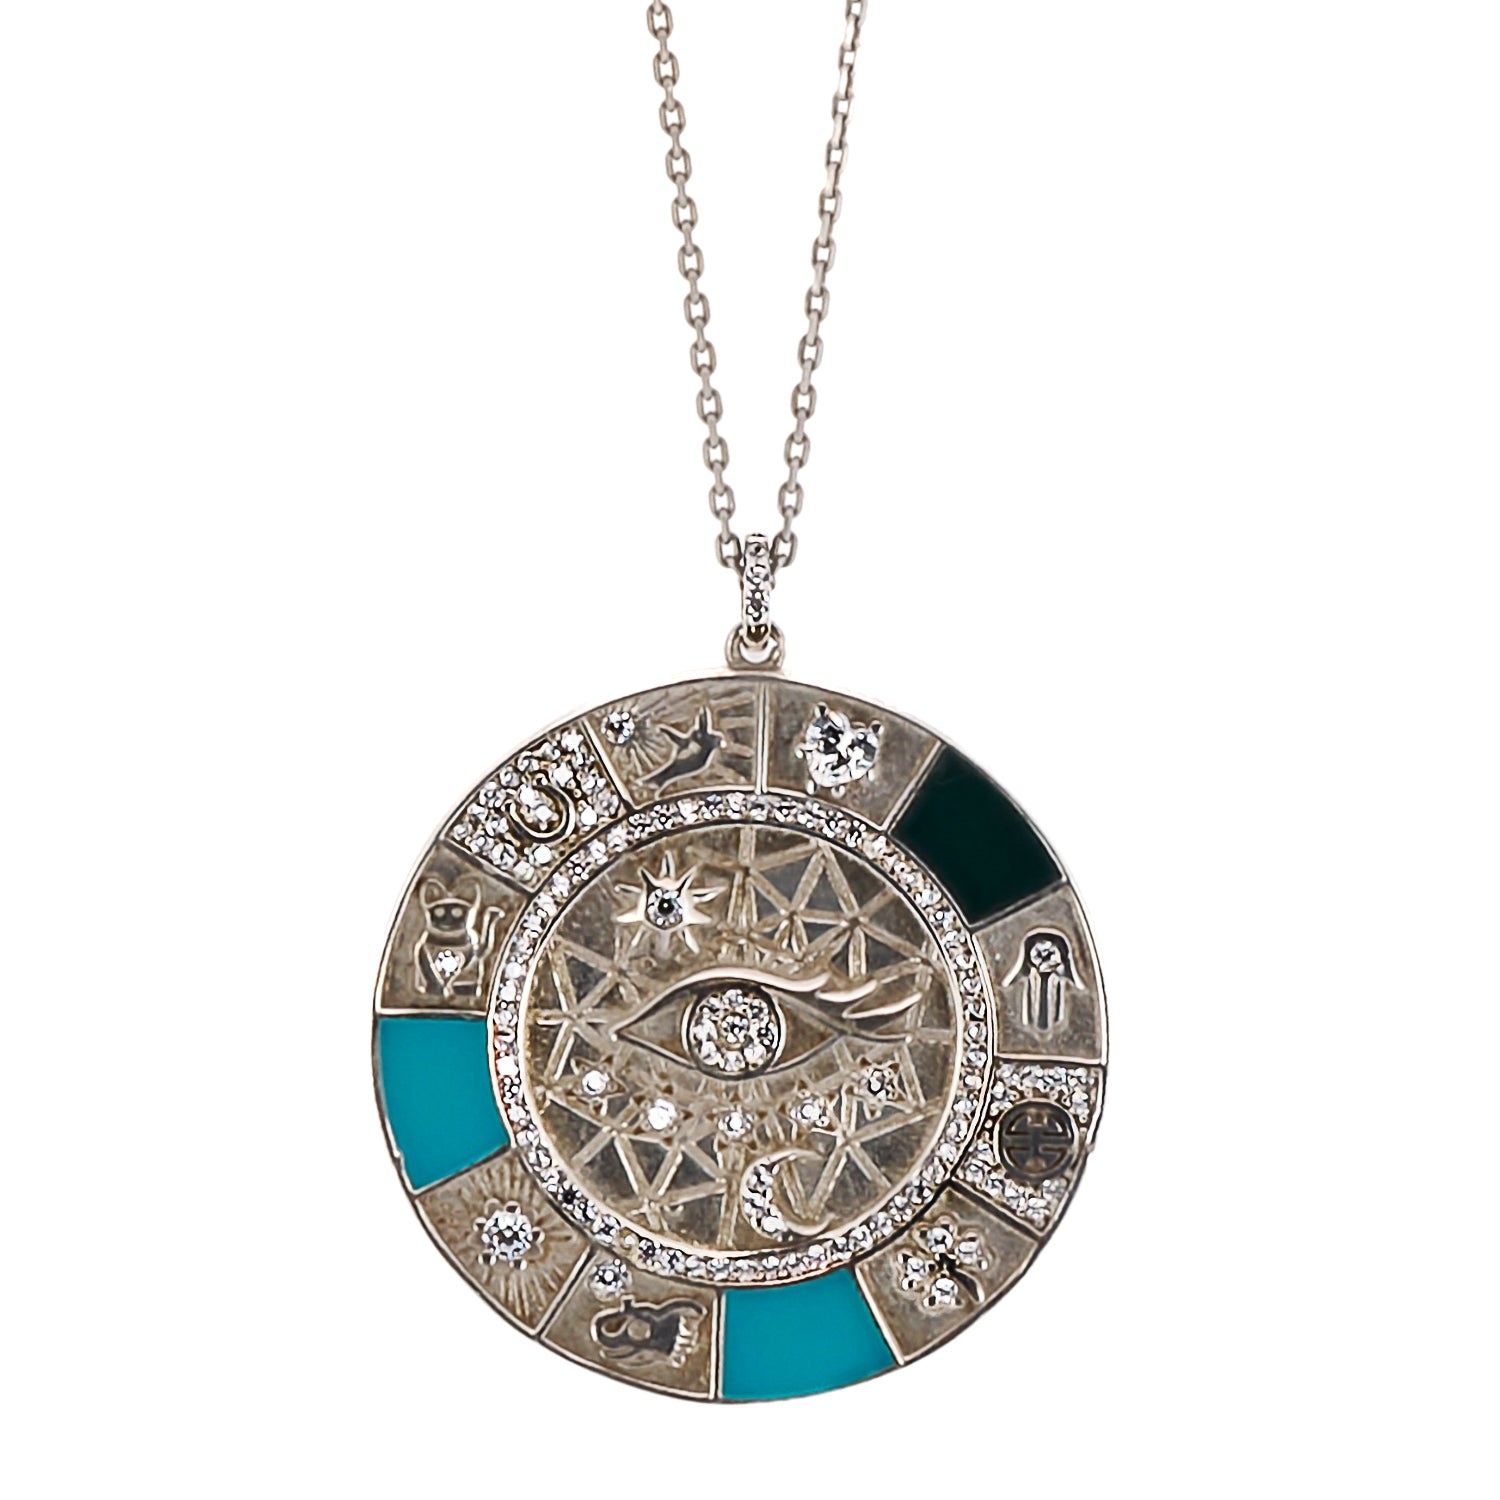 The centerpiece of the Magic Blessings Necklace is a collection of powerful symbols that are traditionally associated with good luck and protection. 